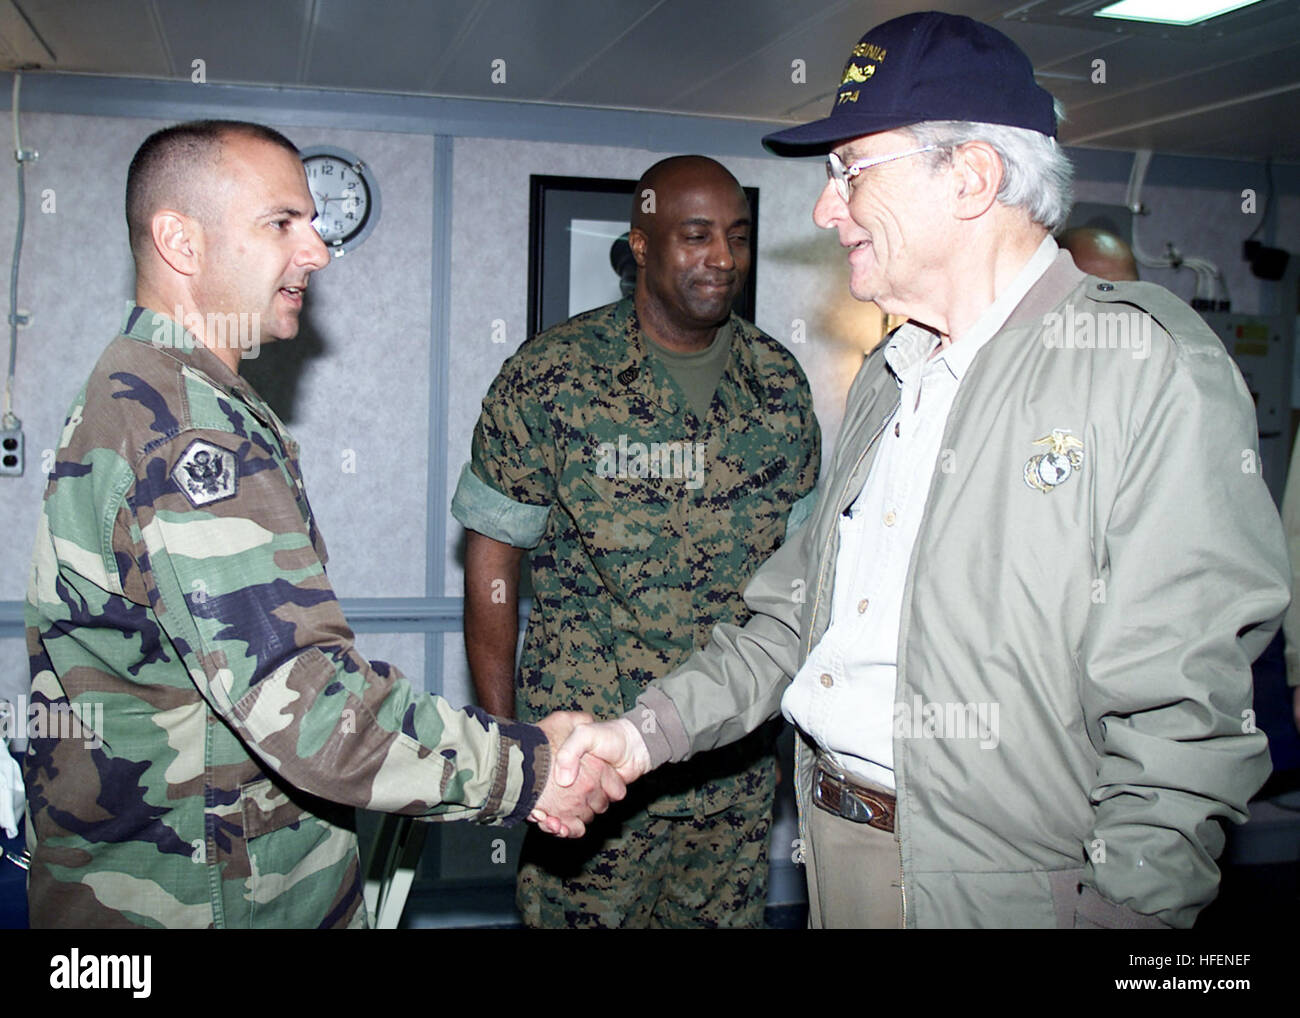 030827-N-2954M-114 Atlantic Ocean (Aug. 27, 2003) -- Senate Armed Services Committee Chairman Sen. John Warner (R-Va.), right, greets Army Sgt. Maj. Lawrence Lane, assigned to Joint Task Force Liberia. Warner visited the ship to meet with Sailors and Marines of the Iwo Jima Amphibious Ready Group (ARG), currently on station off the coast of Liberia in support of peace-keeping missions. During his stay, Warner dined with Sailors and Marines and held an all-hands call in the ship's hangar bay.  U.S. Navy photo by Photographer's Mate 3rd Class Julianne Metzger.  (RELEASED) US Navy 030827-N-2954M- Stock Photo